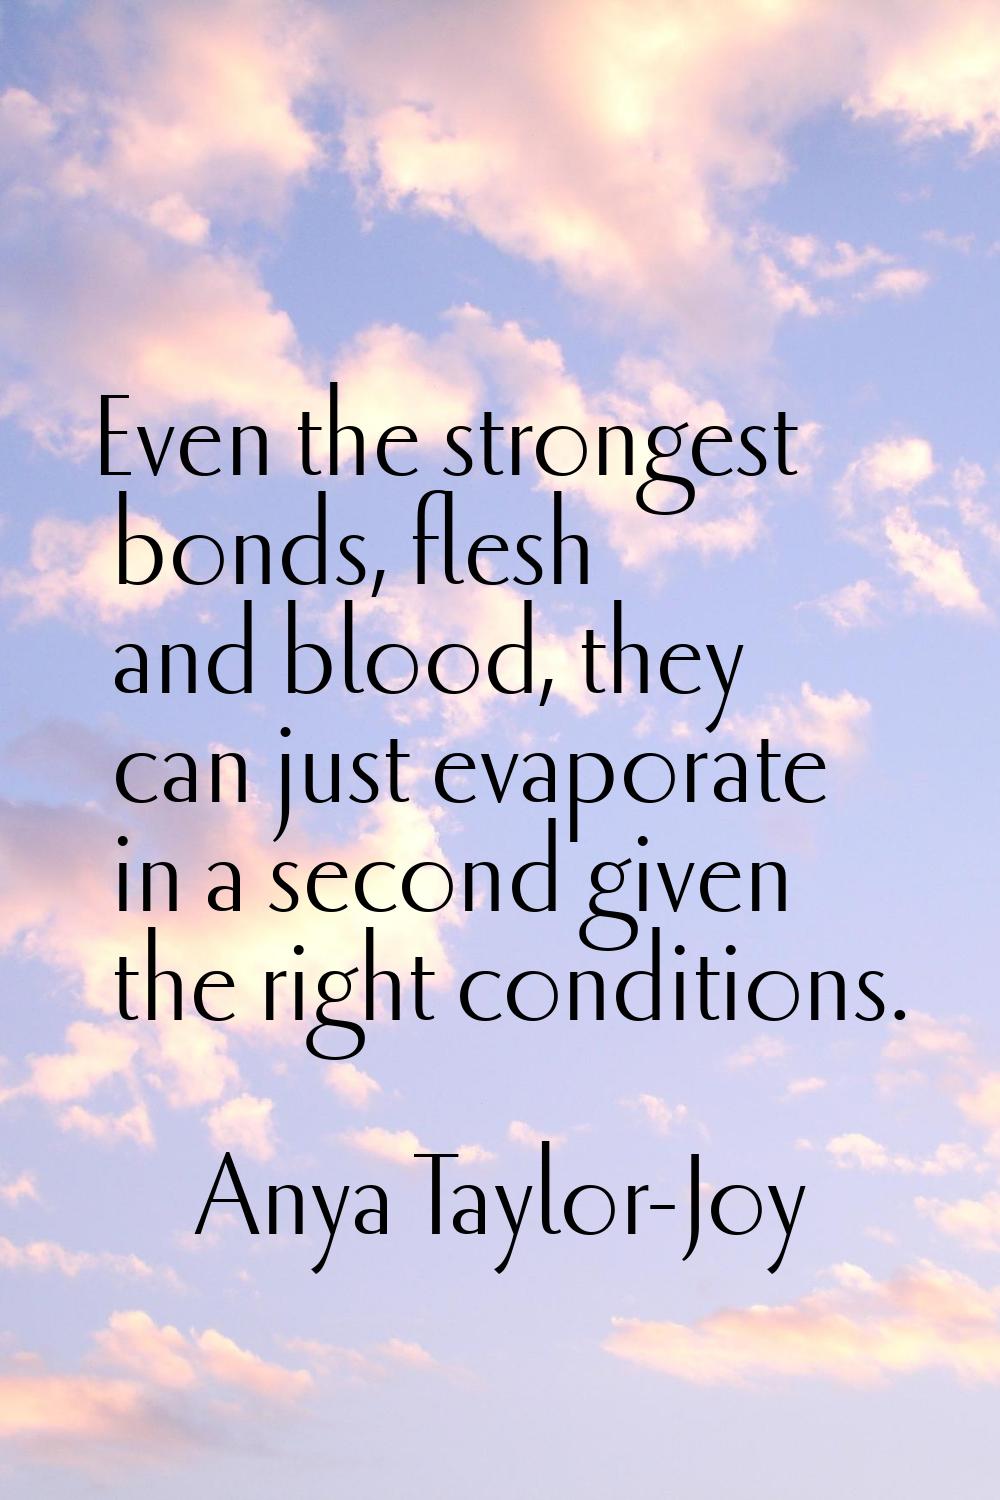 Even the strongest bonds, flesh and blood, they can just evaporate in a second given the right cond